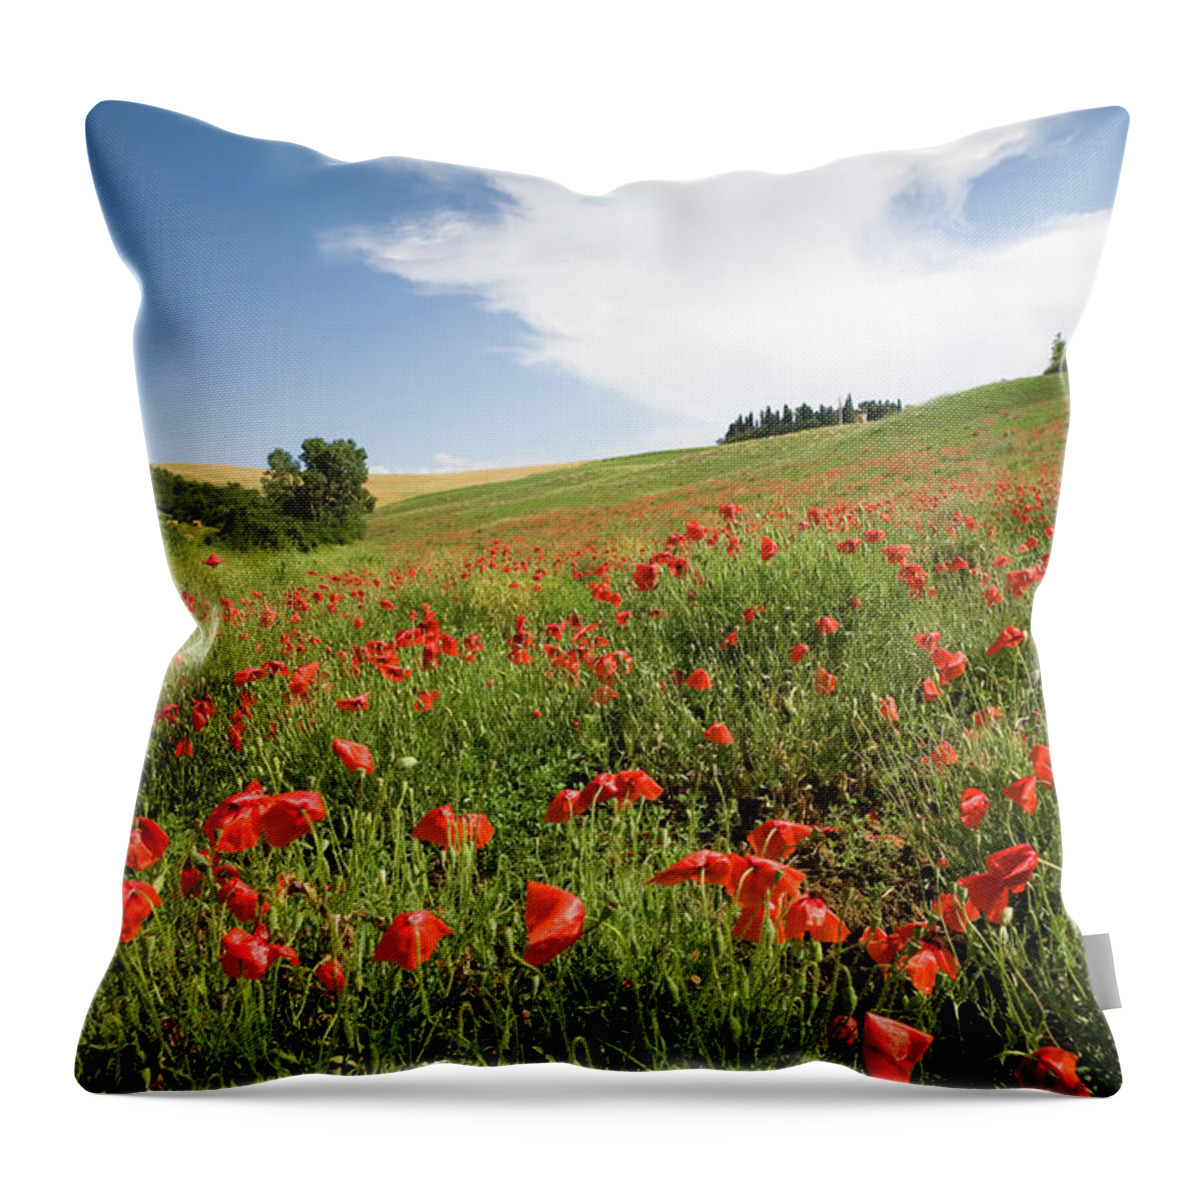 Recreational Pursuit Throw Pillow featuring the photograph Italian Poppy Field II by Wingmar